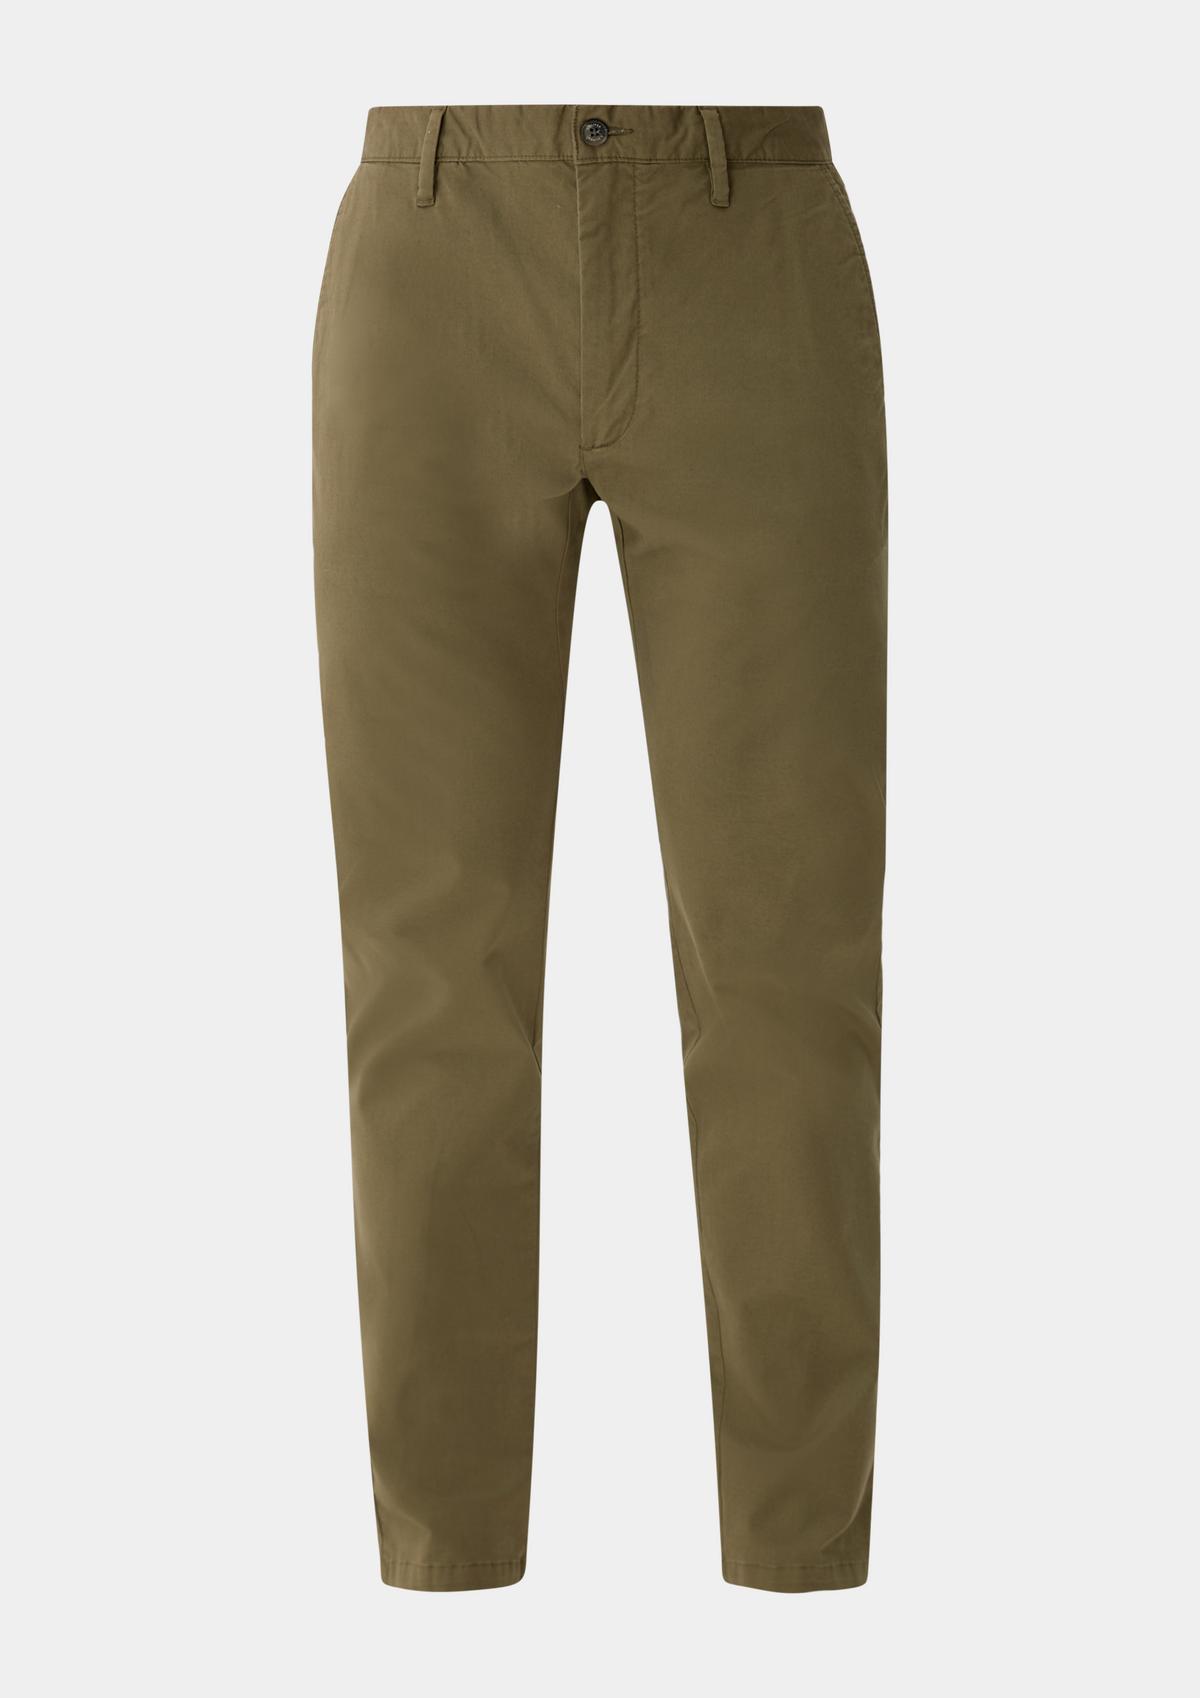 for Chinos Men